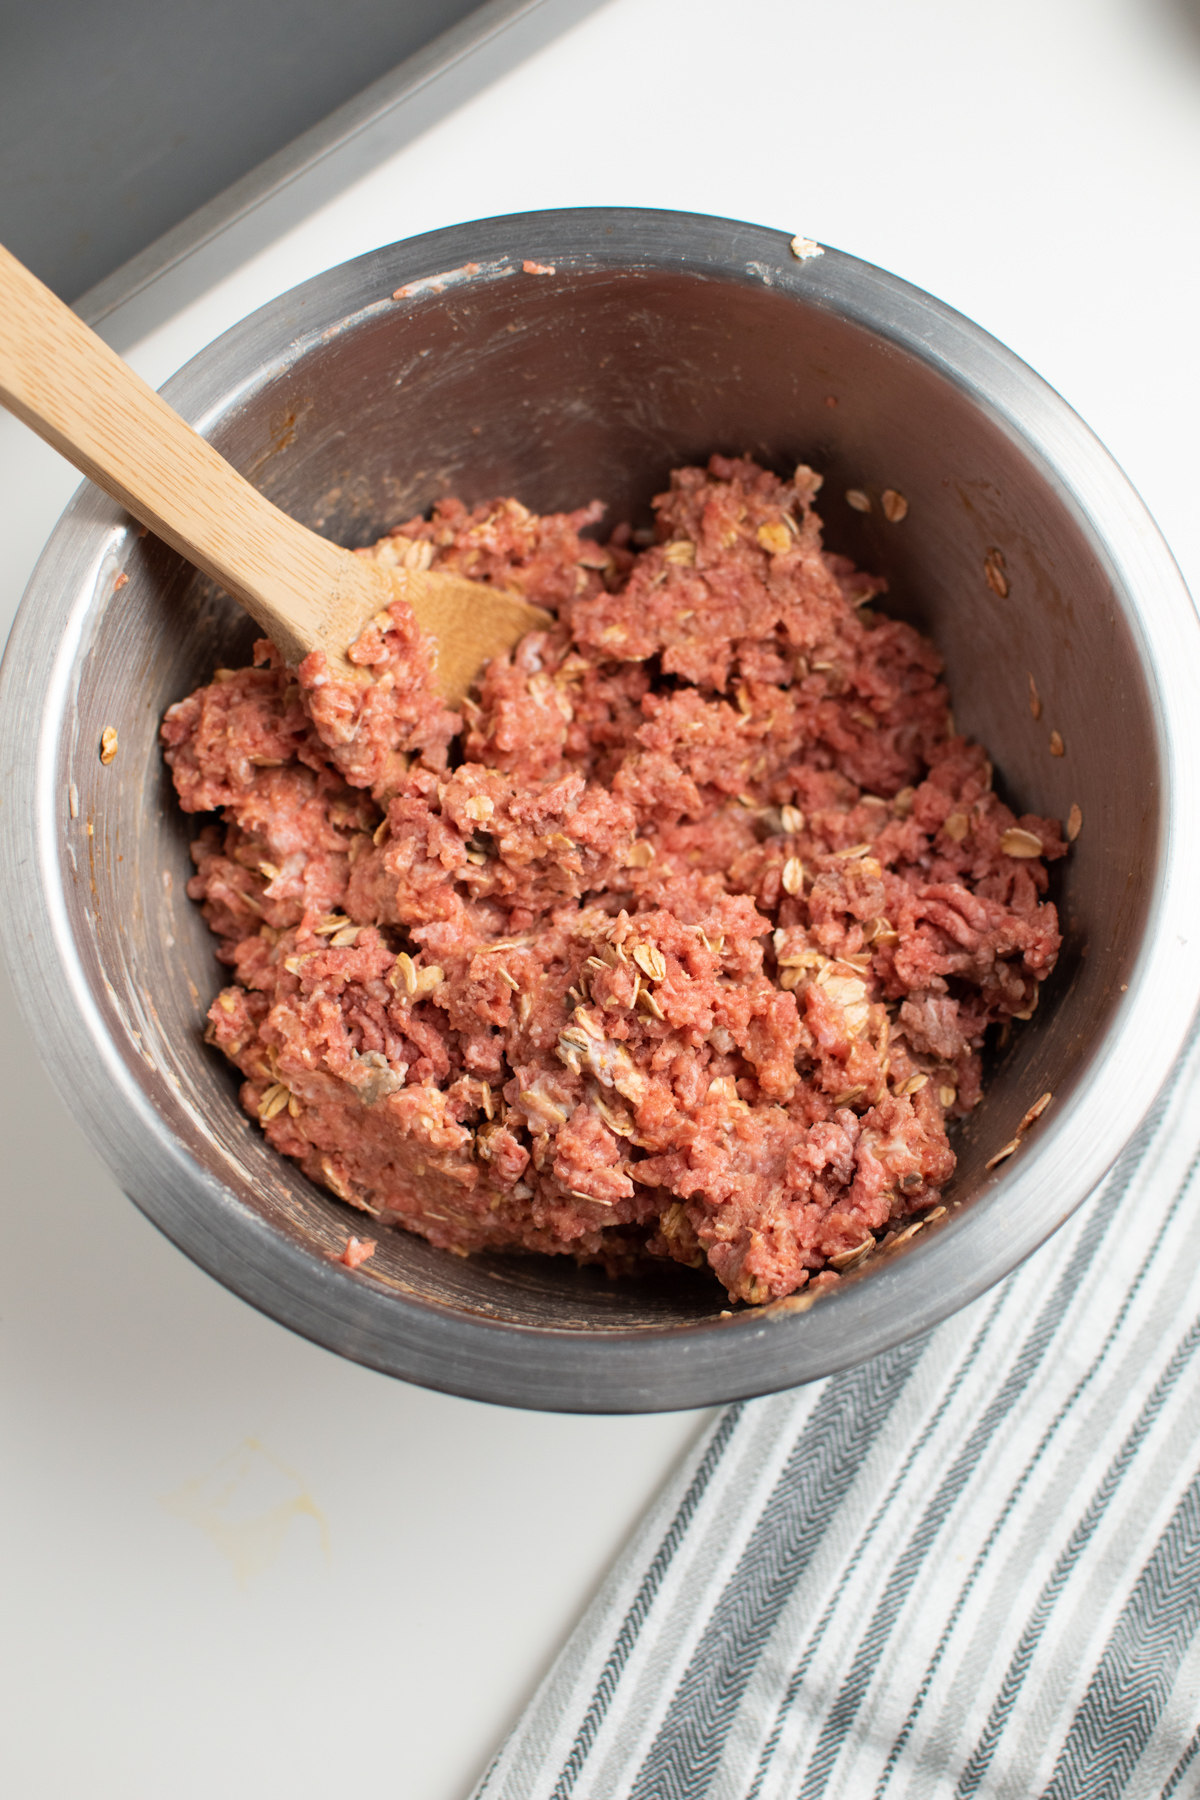 Meatloaf mixture with oats and wooden spoon in large metal mixing bowl.